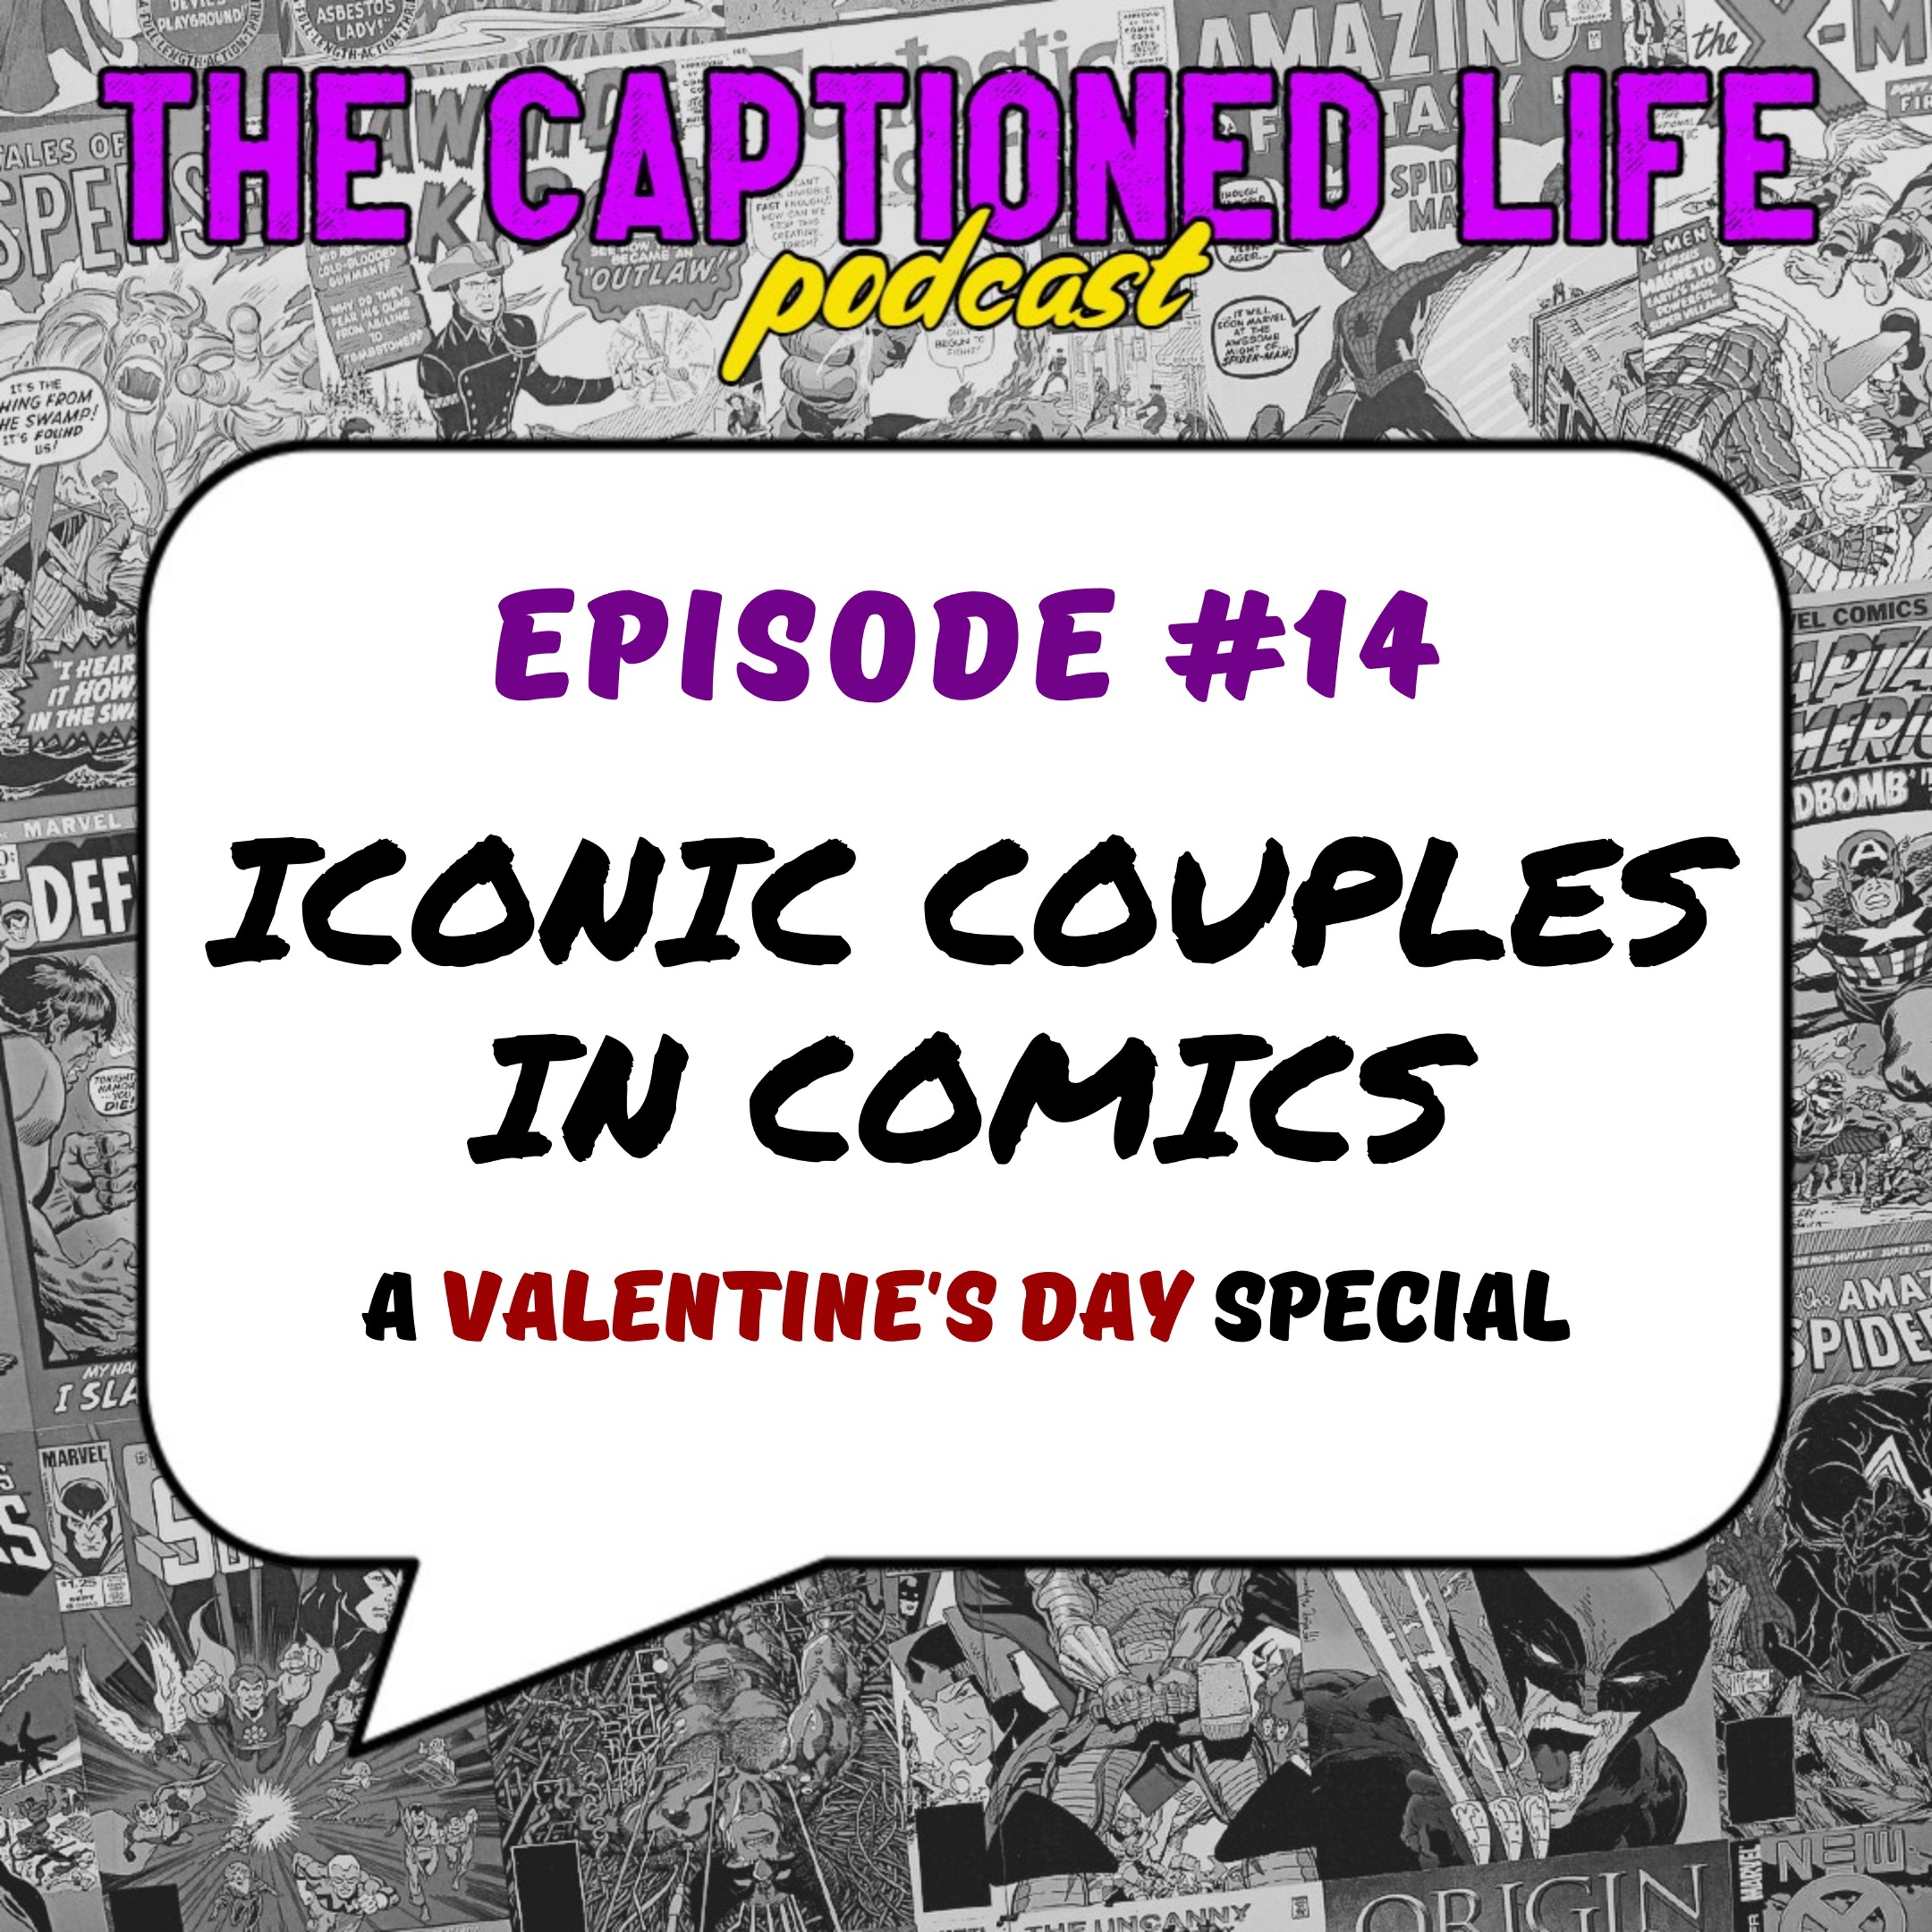 #14 Iconic Couples In Comics: A Valentines Day Special Image